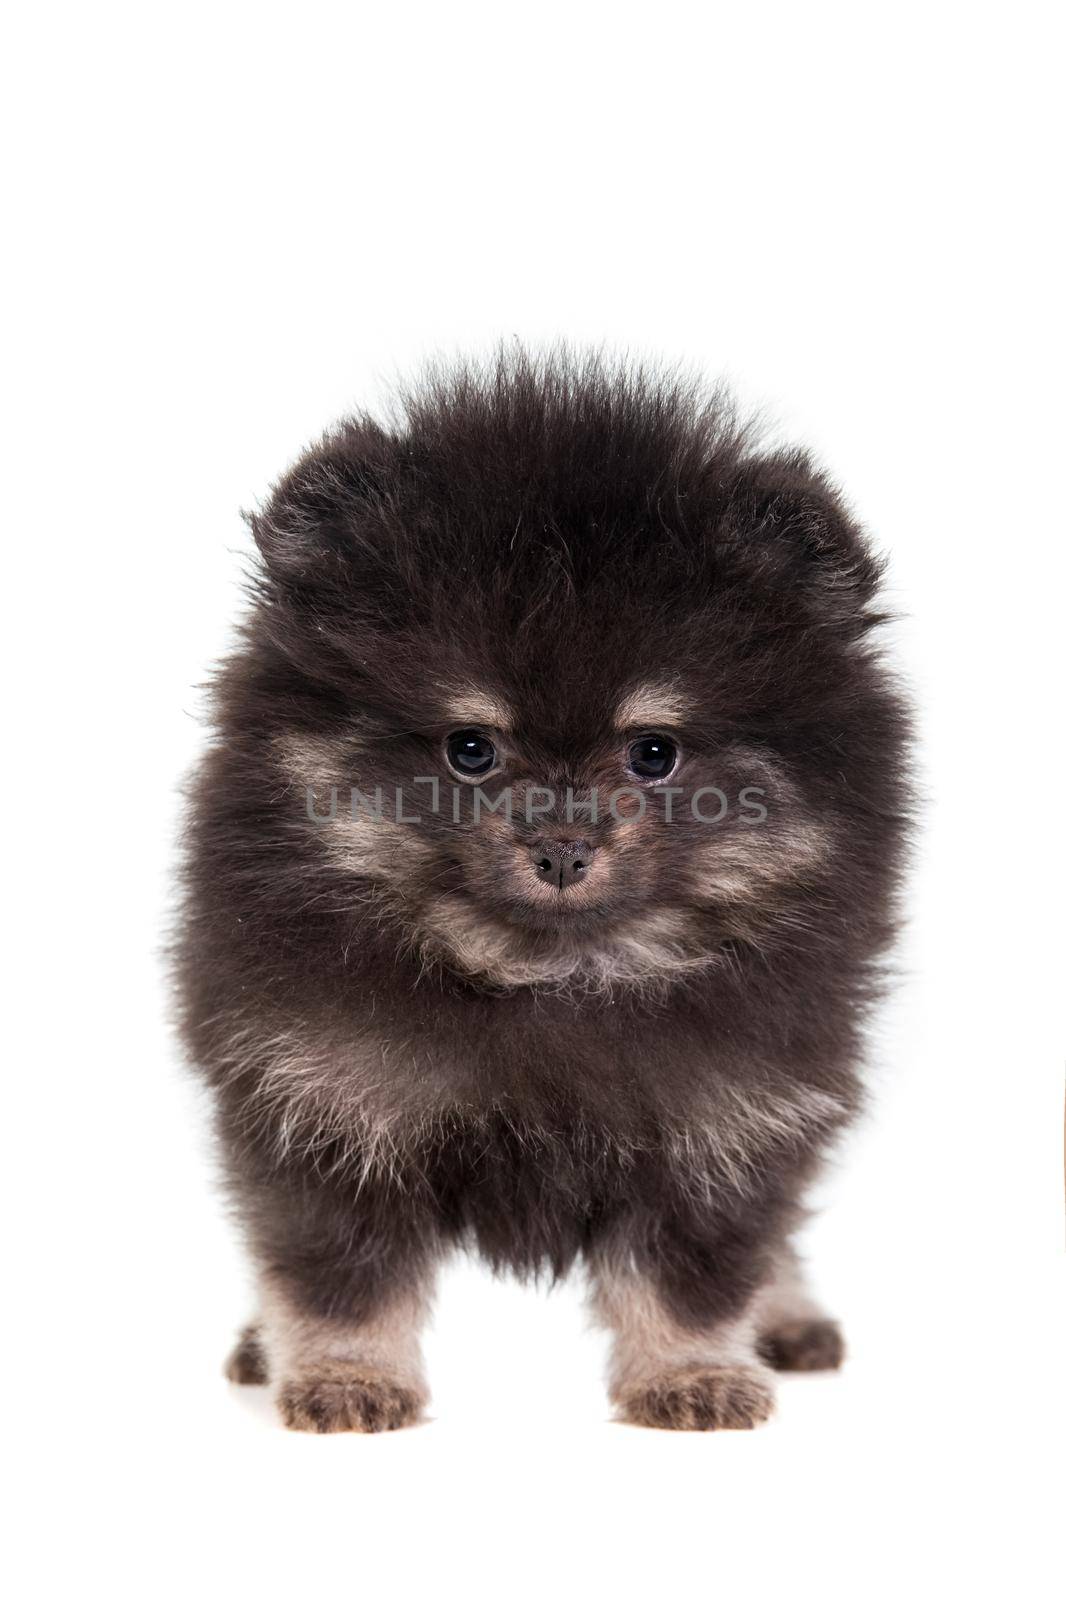 Miniature Spitz puppy on white by RosaJay